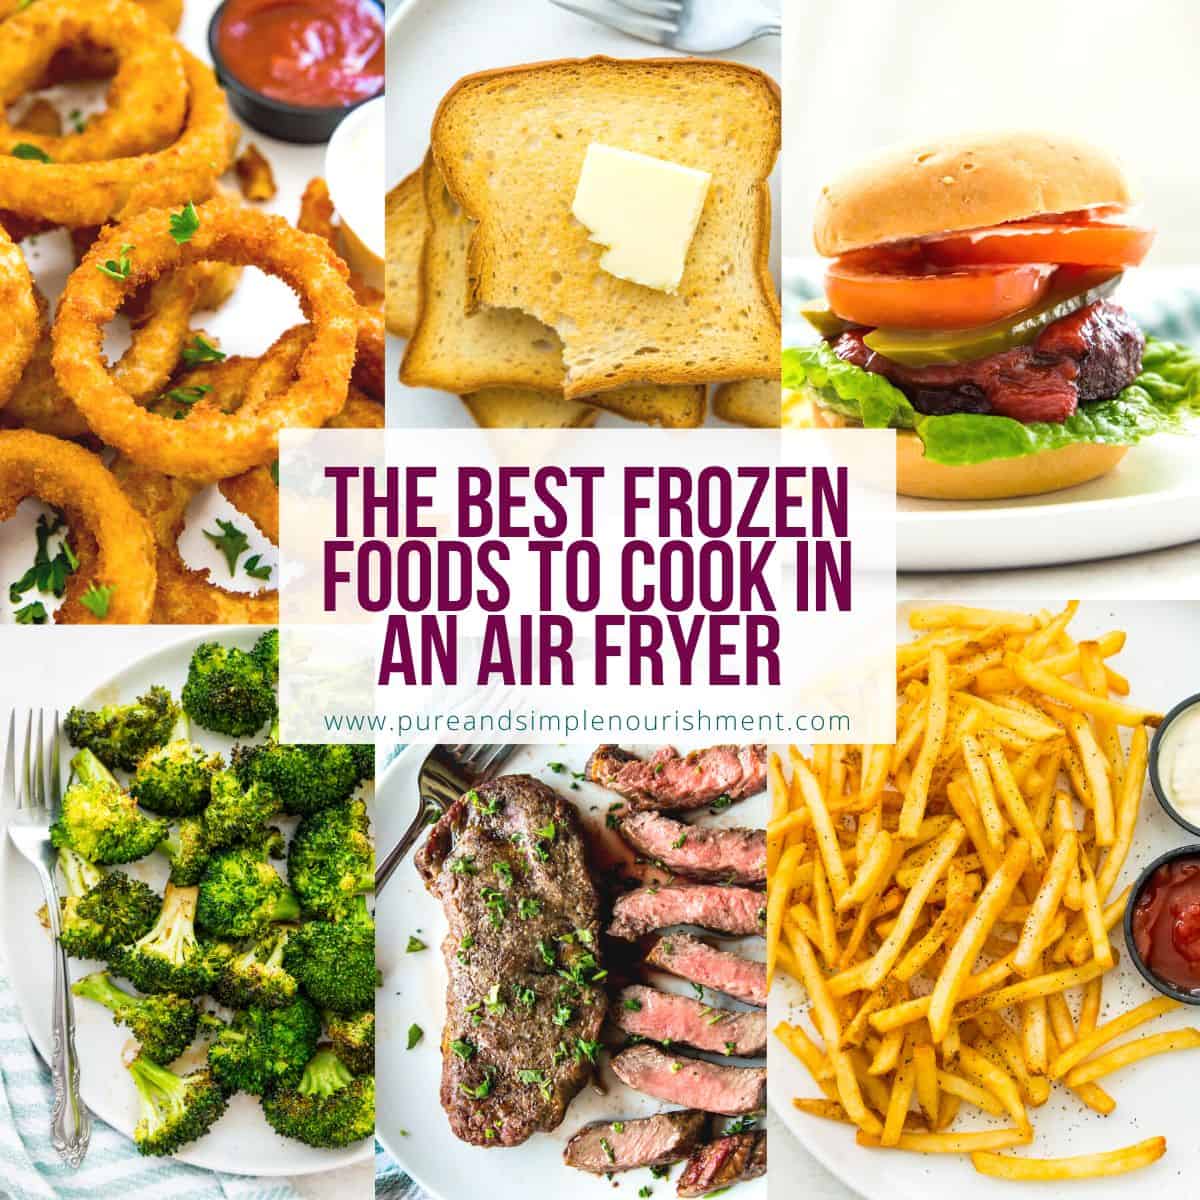 A collage of different foods with the title The Best Frozen Foods to Cook in an Air Fryer over them.